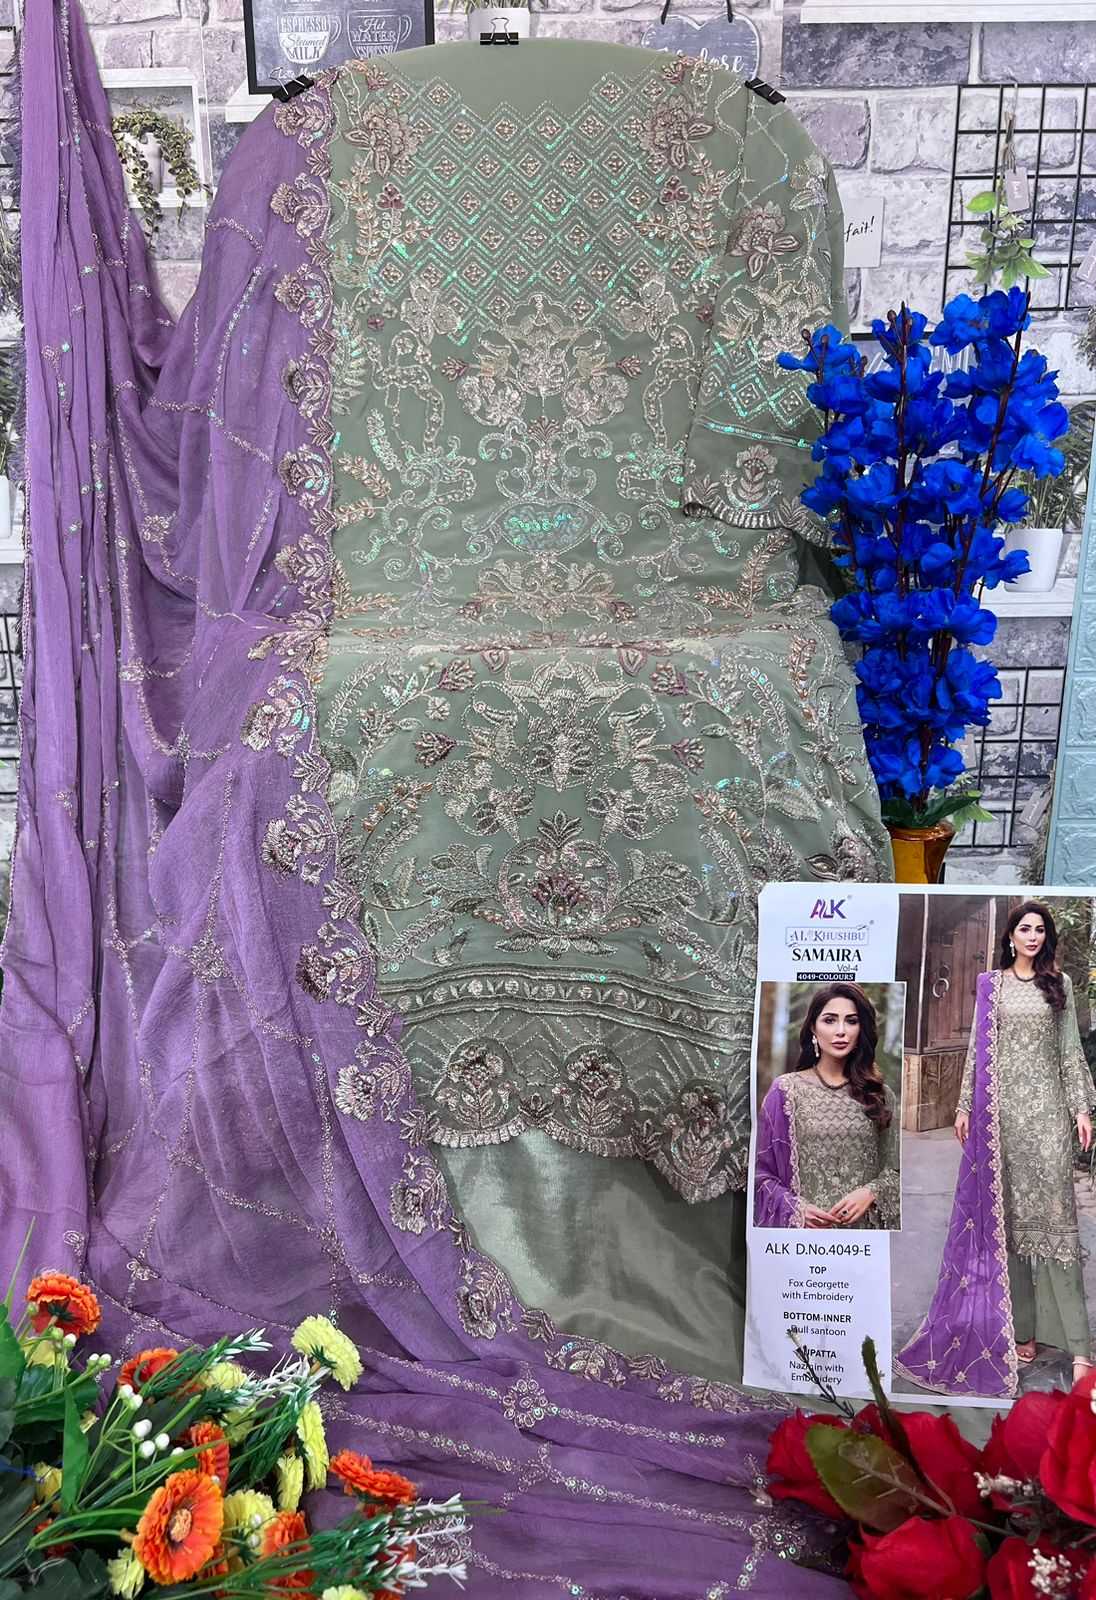 Al Khushbu Samaira Vol 4 4049 Colours Georgette with Embroidery Latest Pakistani suits Collection - jilaniwholesalesuit